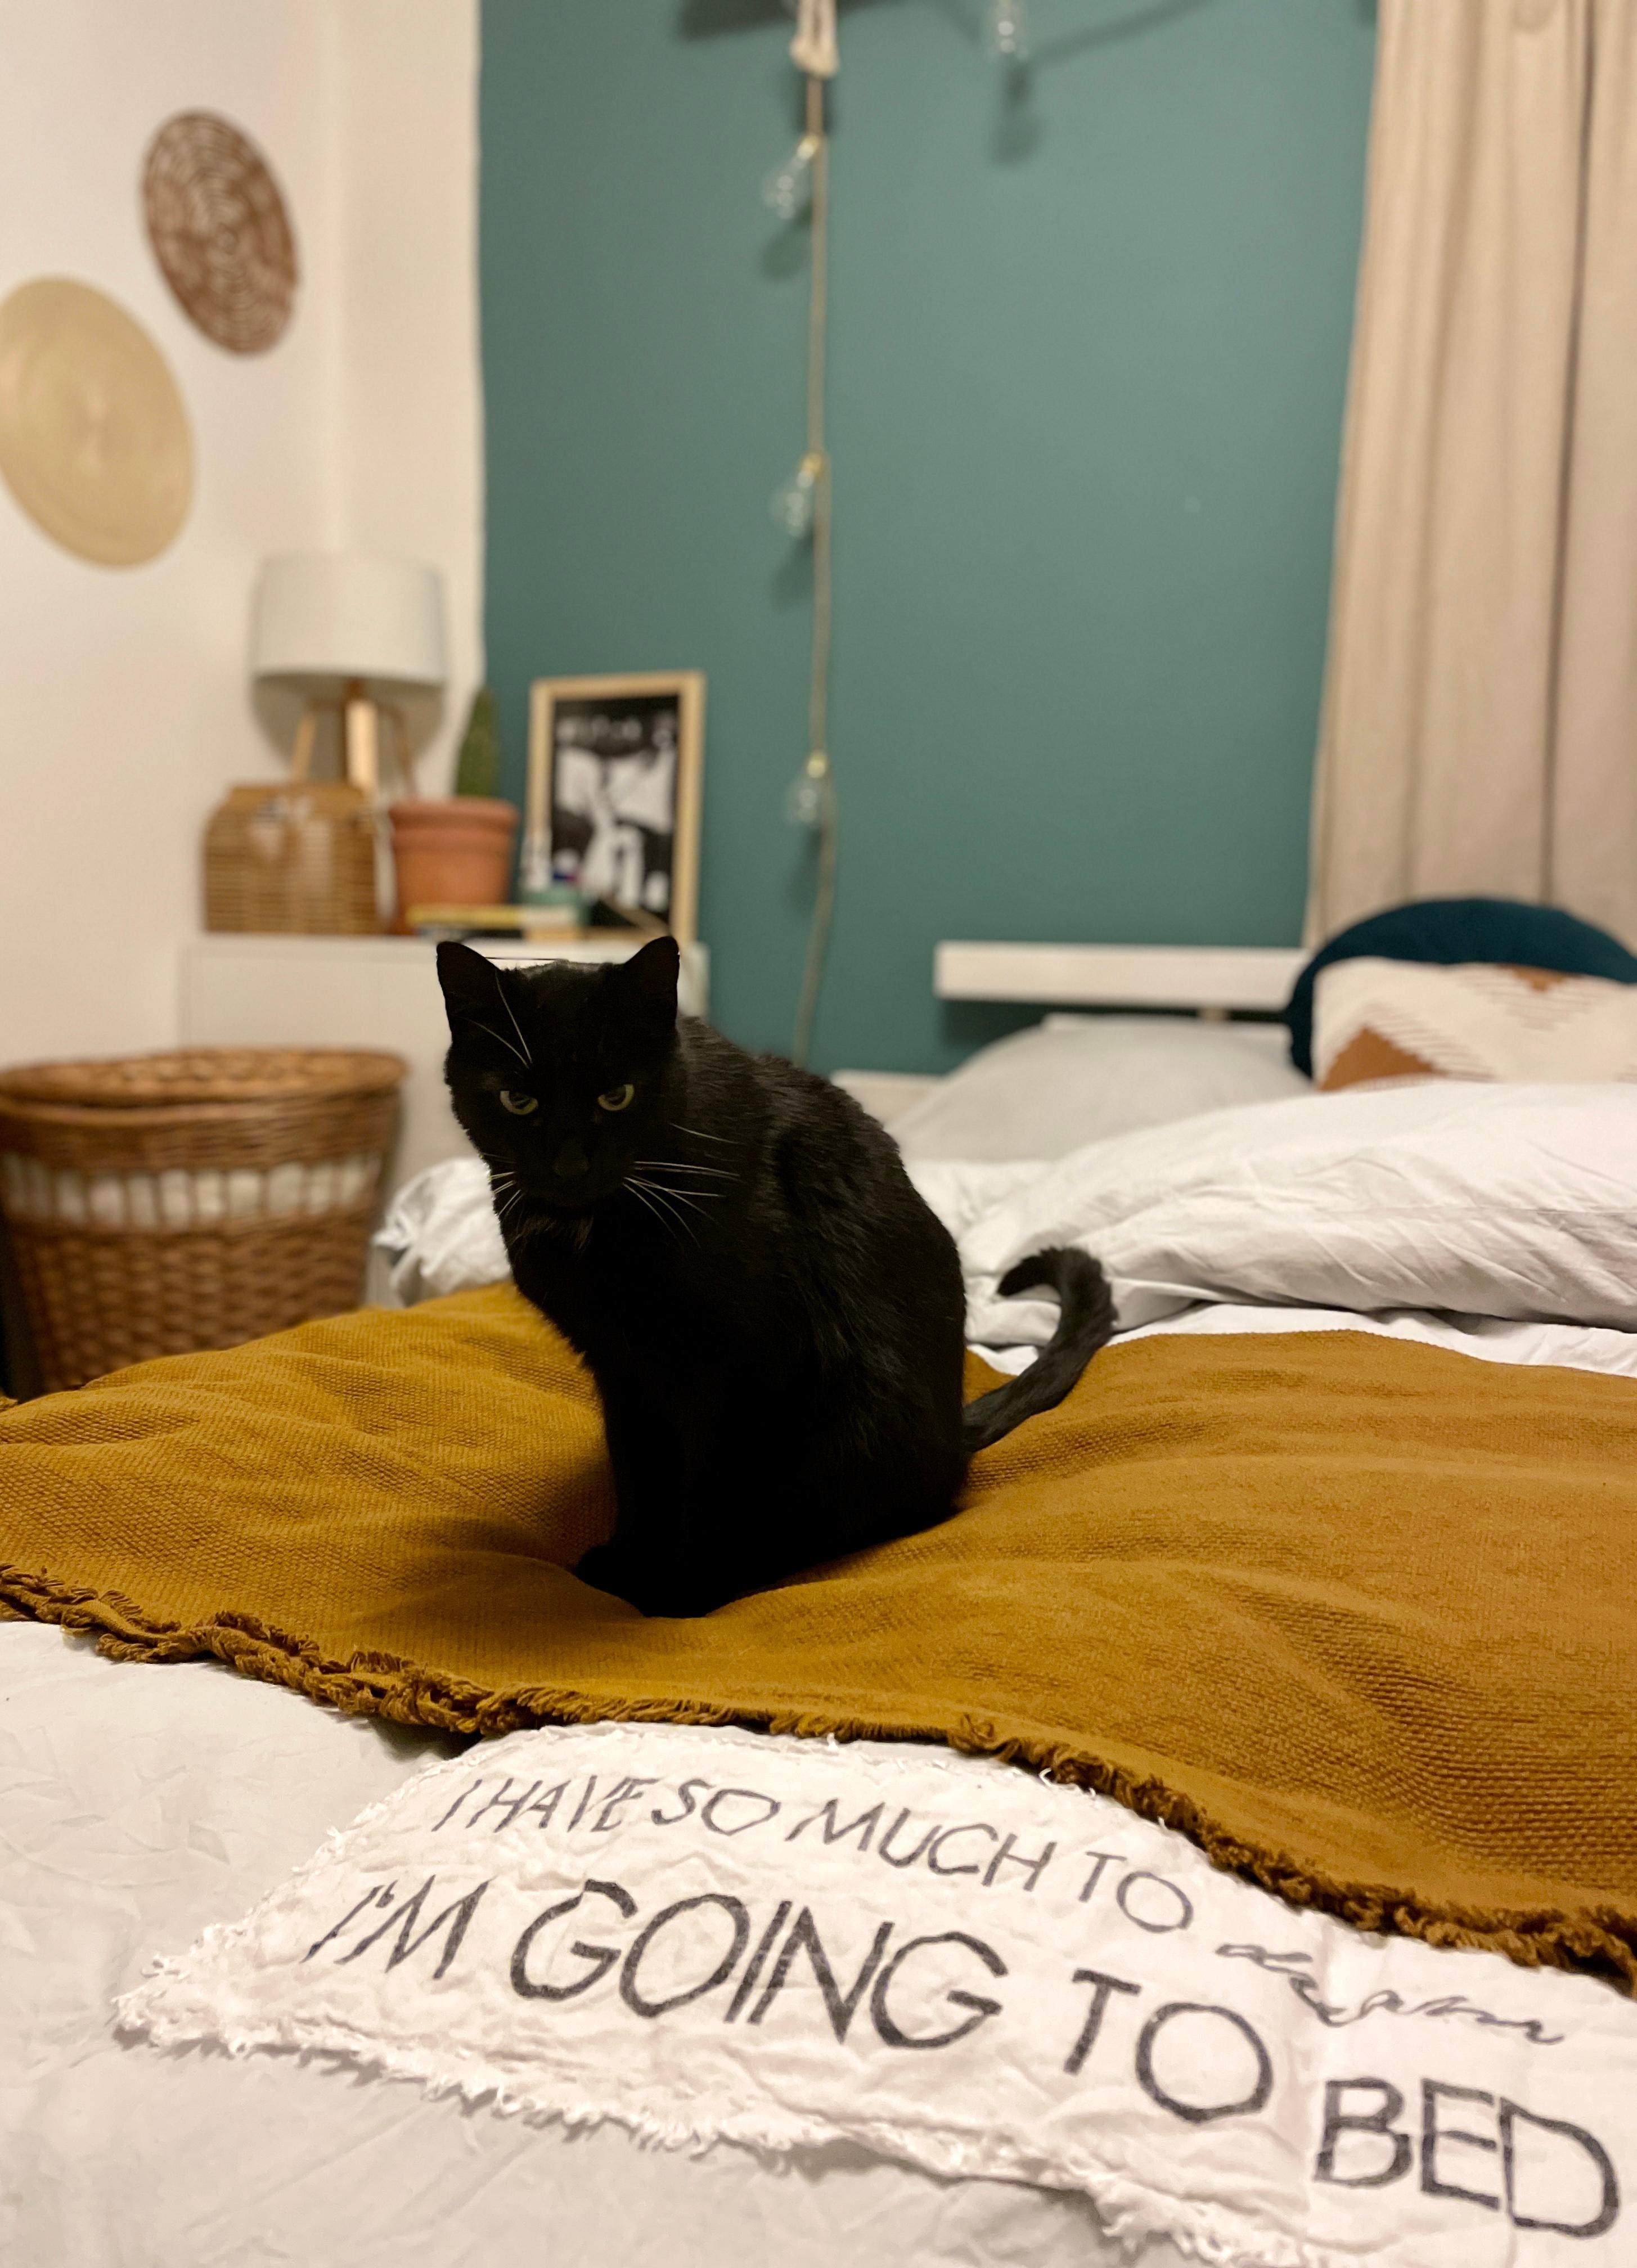 Sundays in bed.... #alanthecat#blackcat#stayinbed#cozyhome#hygge#couchmagazin#couchstyle